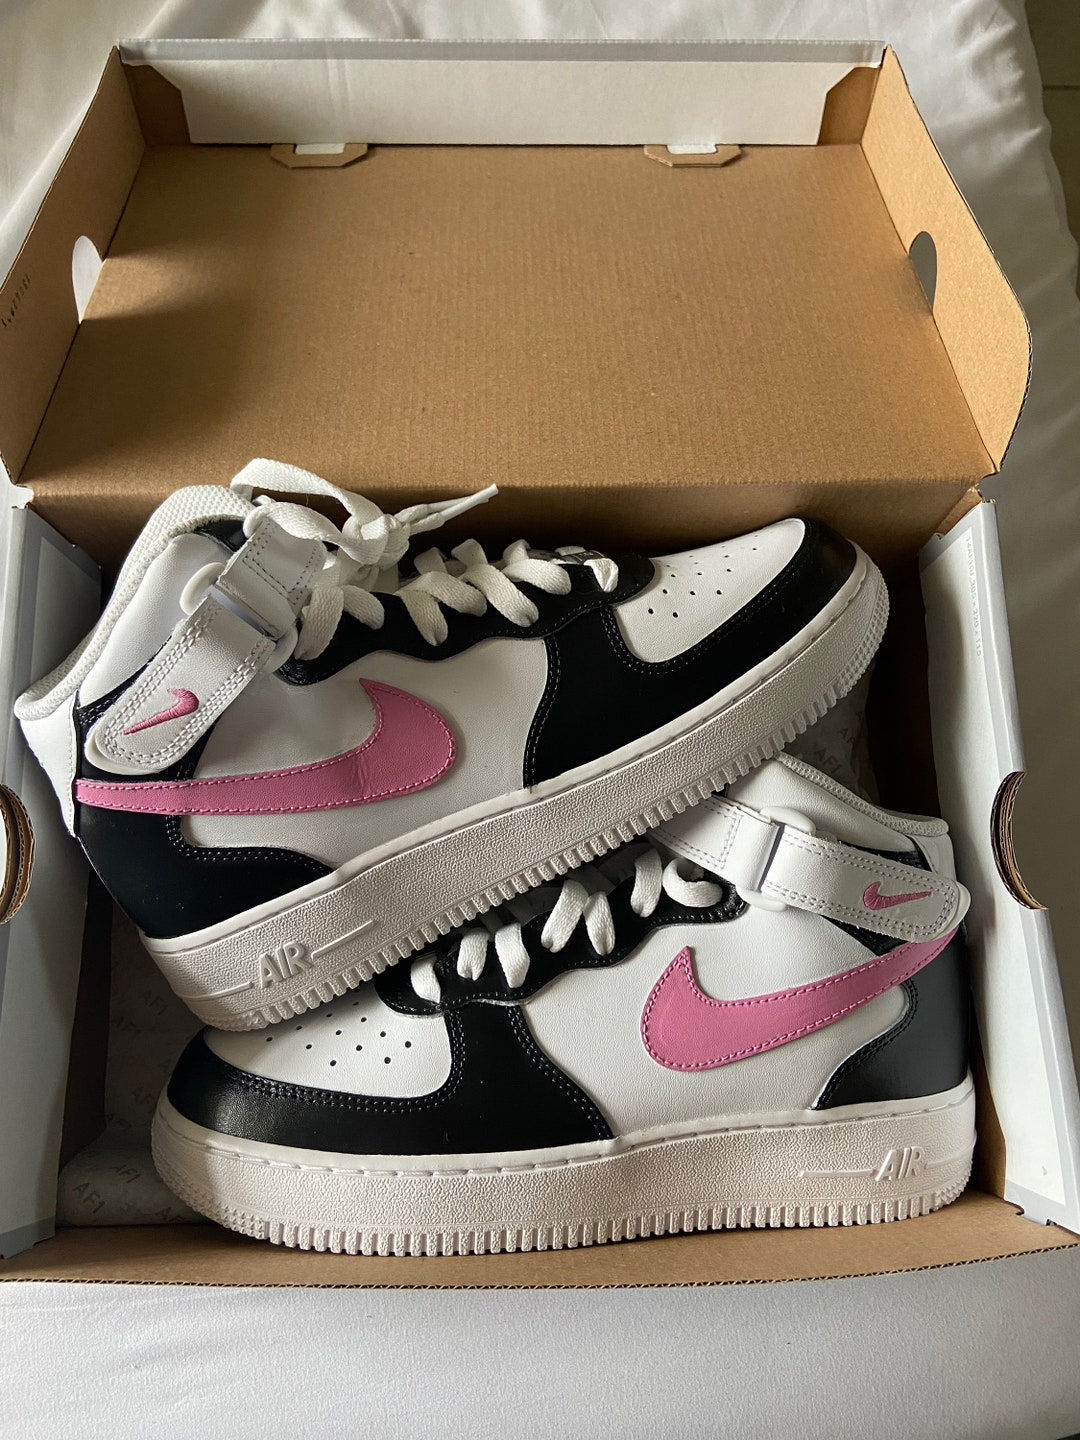 sigaret lint Generator Black and Pink Customized Nike Air Force 1 Mids - Etsy